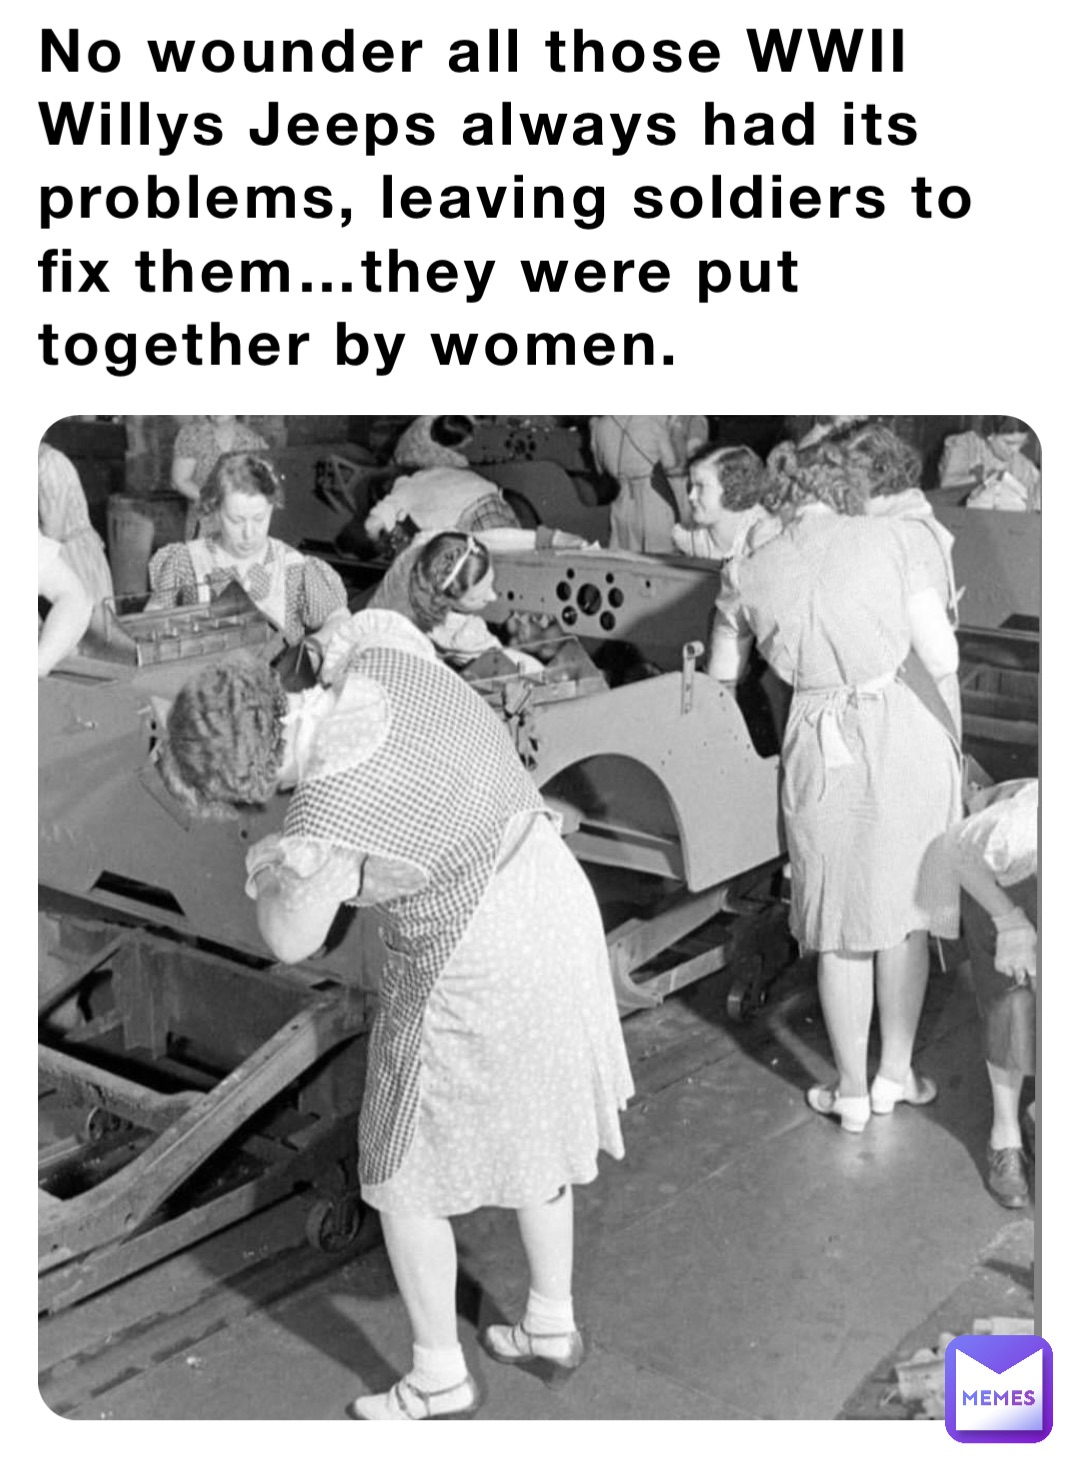 No wounder all those WWII Willys Jeeps always had its problems, leaving soldiers to fix them…they were put together by women.